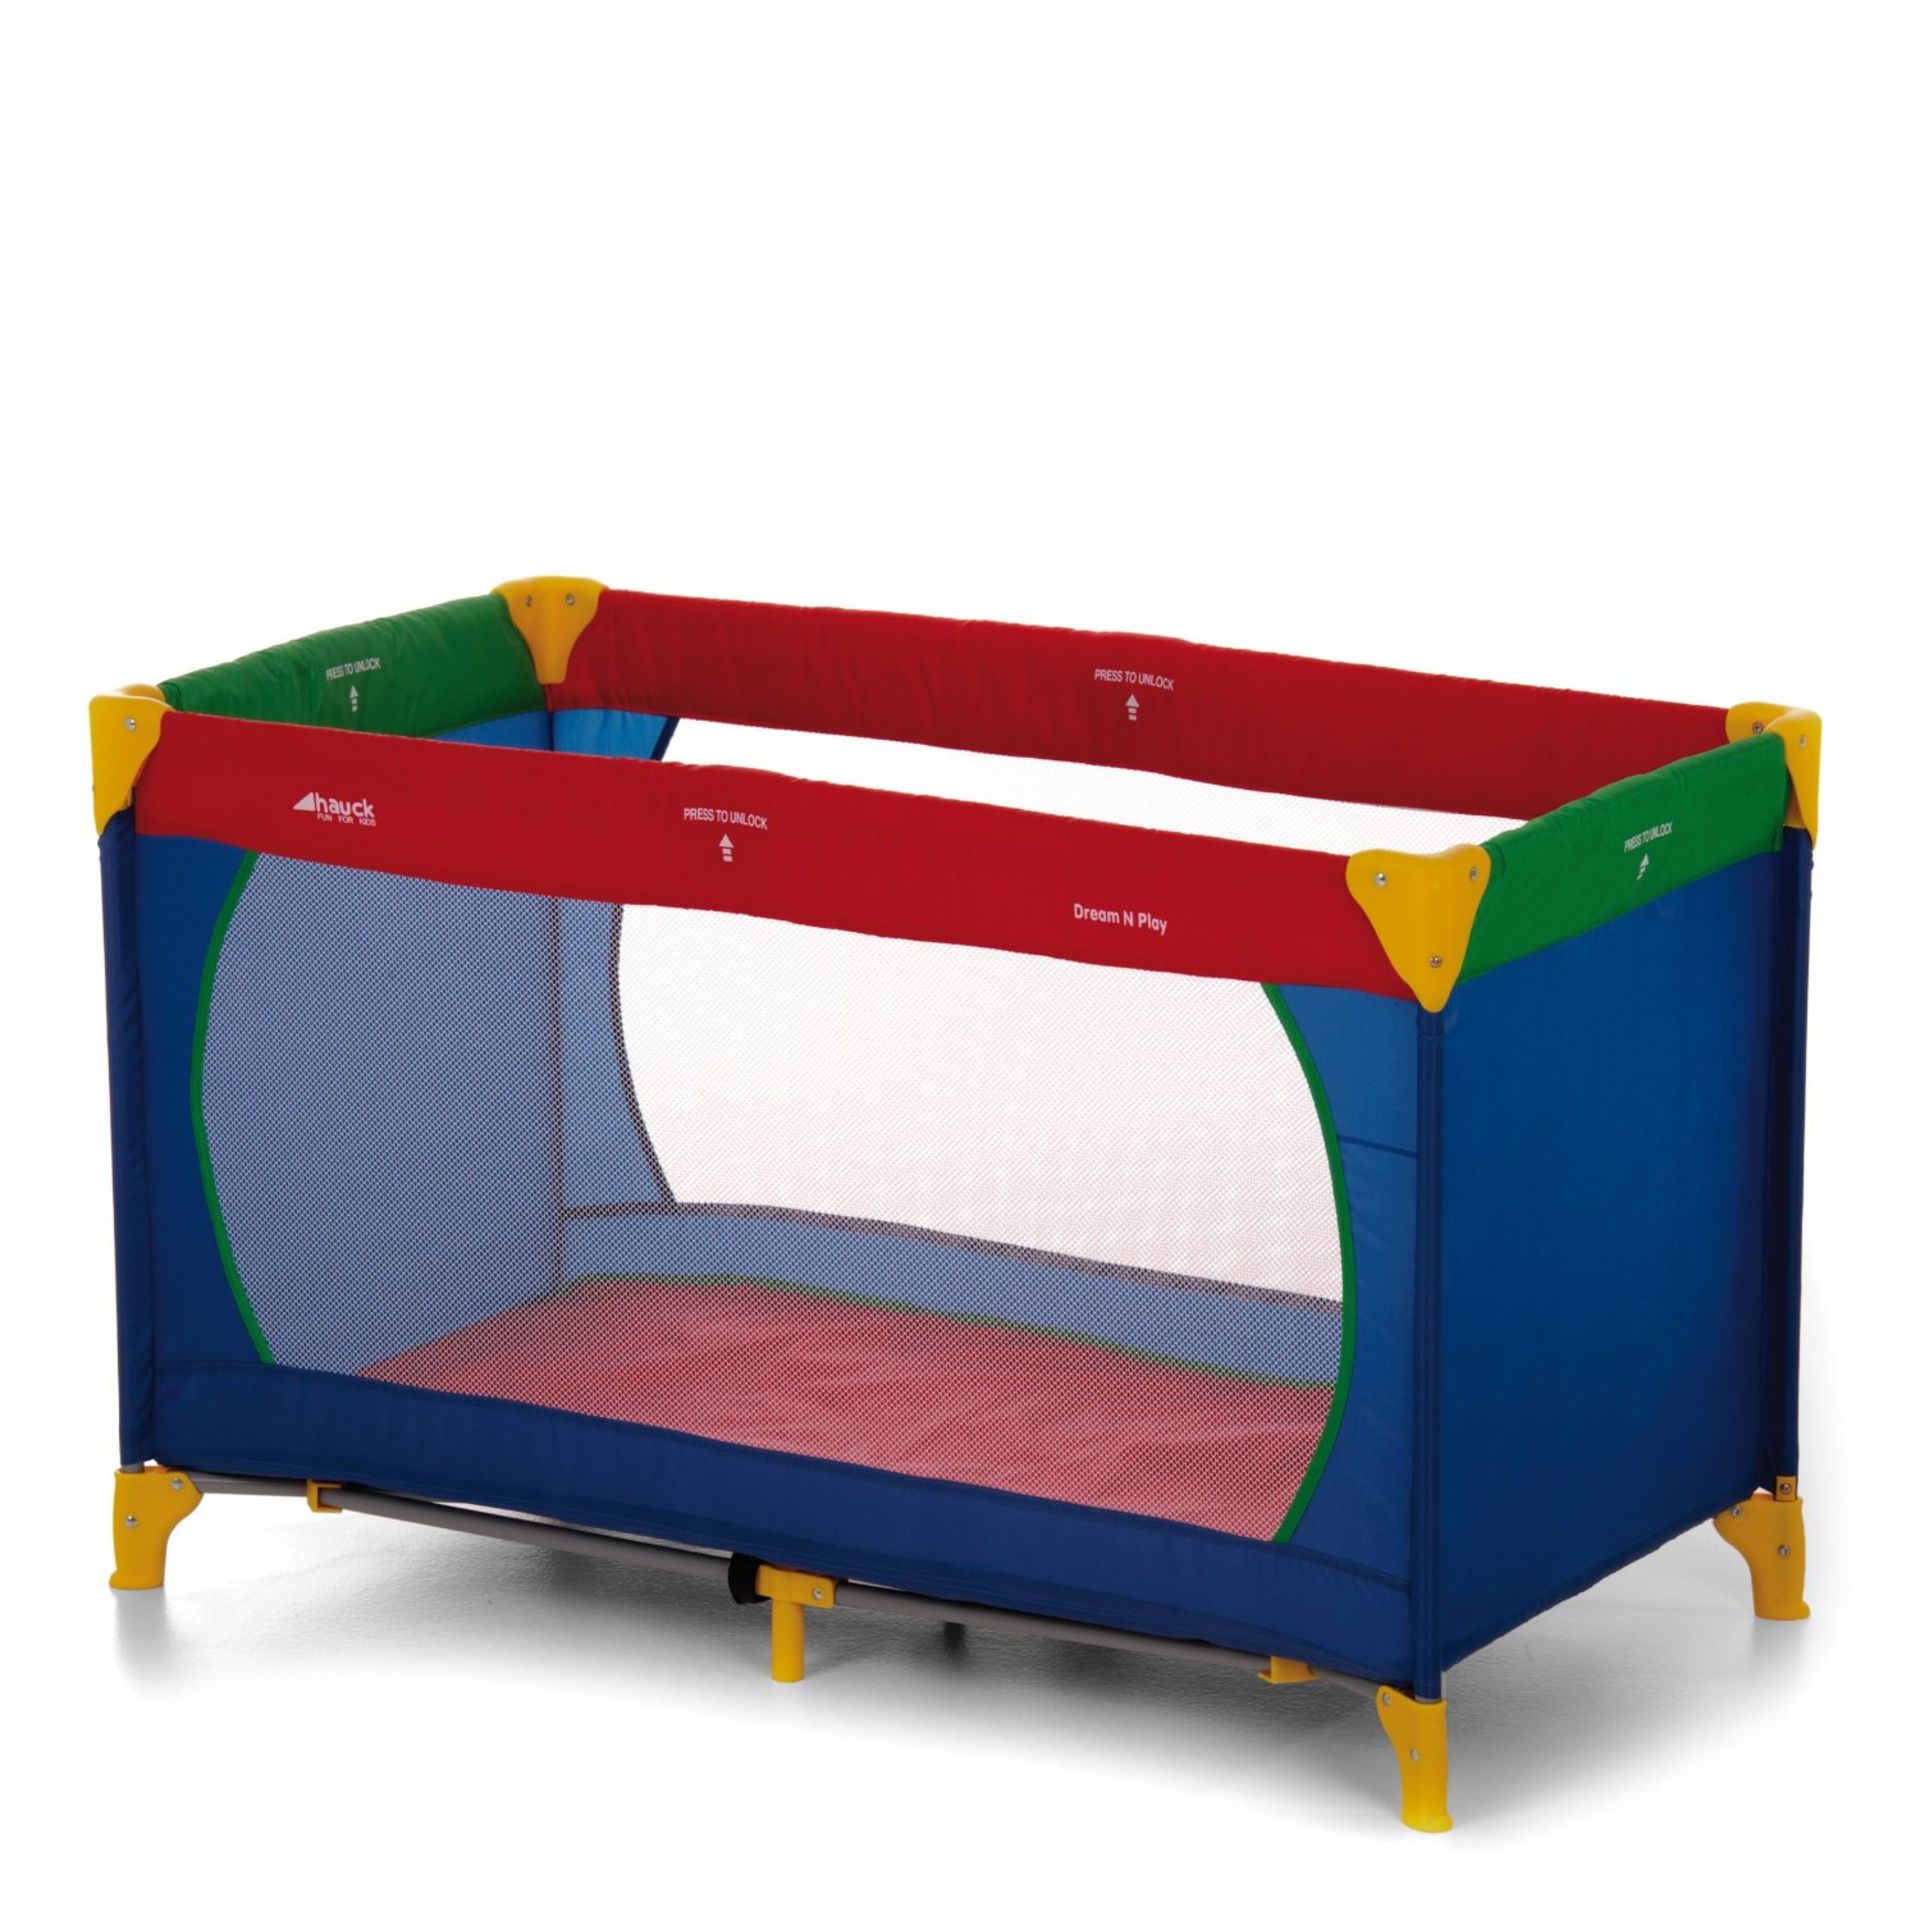 BRAND NEW Hauck Dream N Play Travel Cot - Multi-coloured,100 x 70 cm (Approx) DAMAGED CARRY CASE